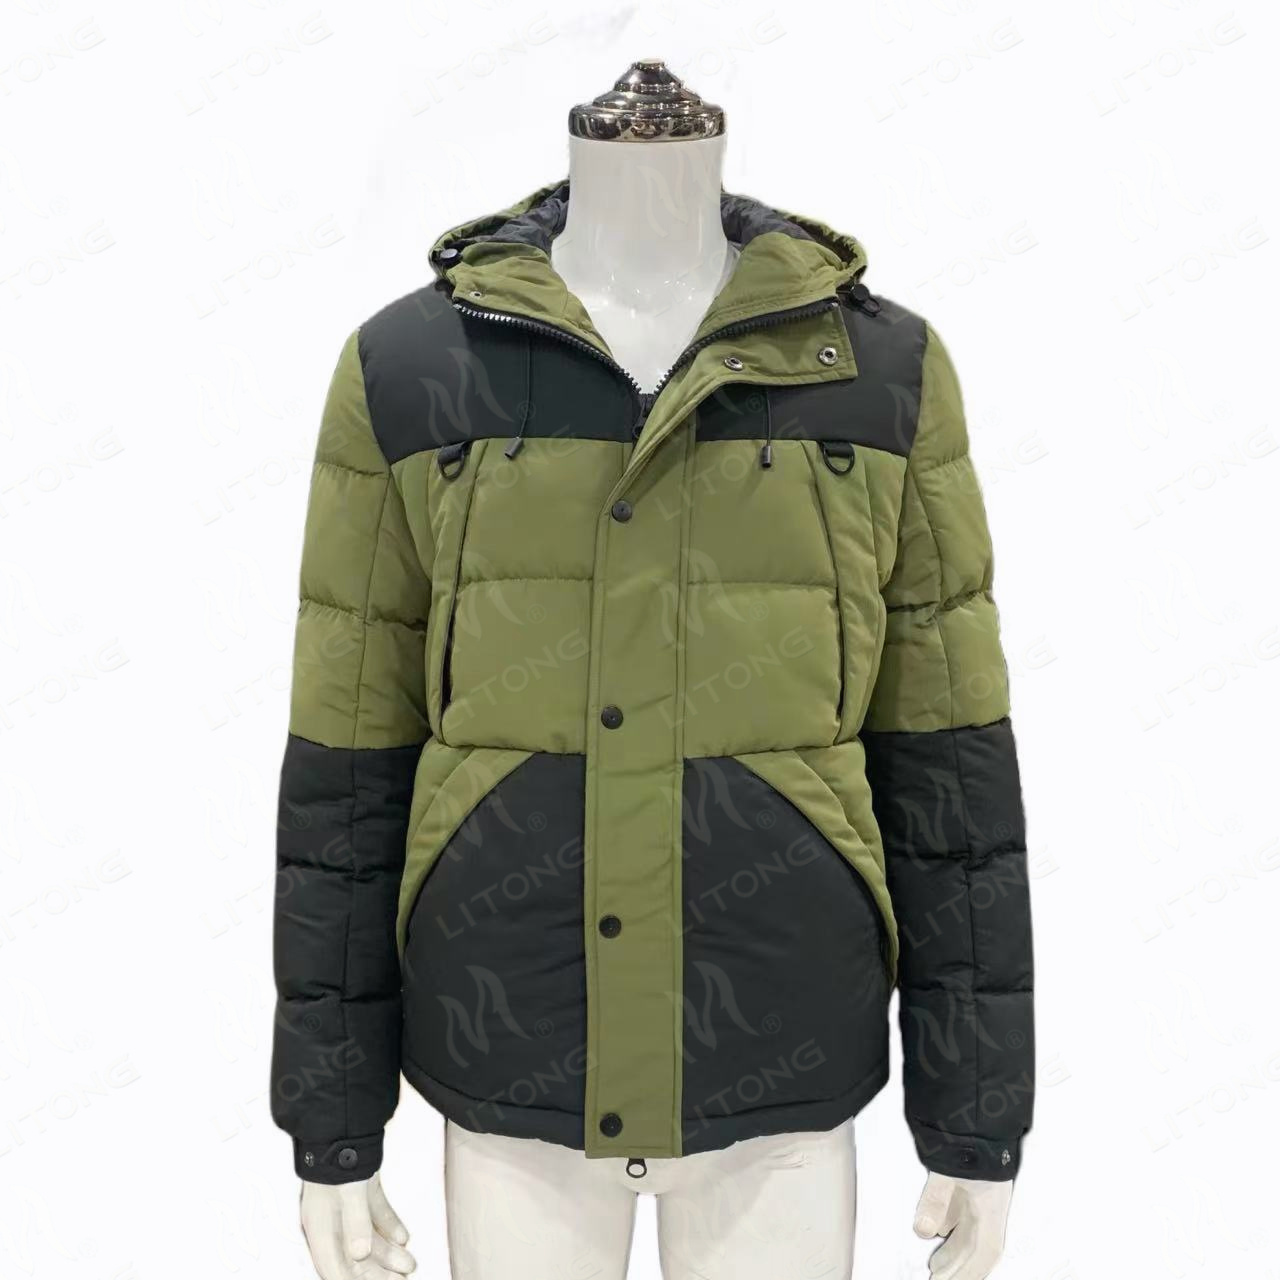 Men's winter puffy jacket constrast colors.